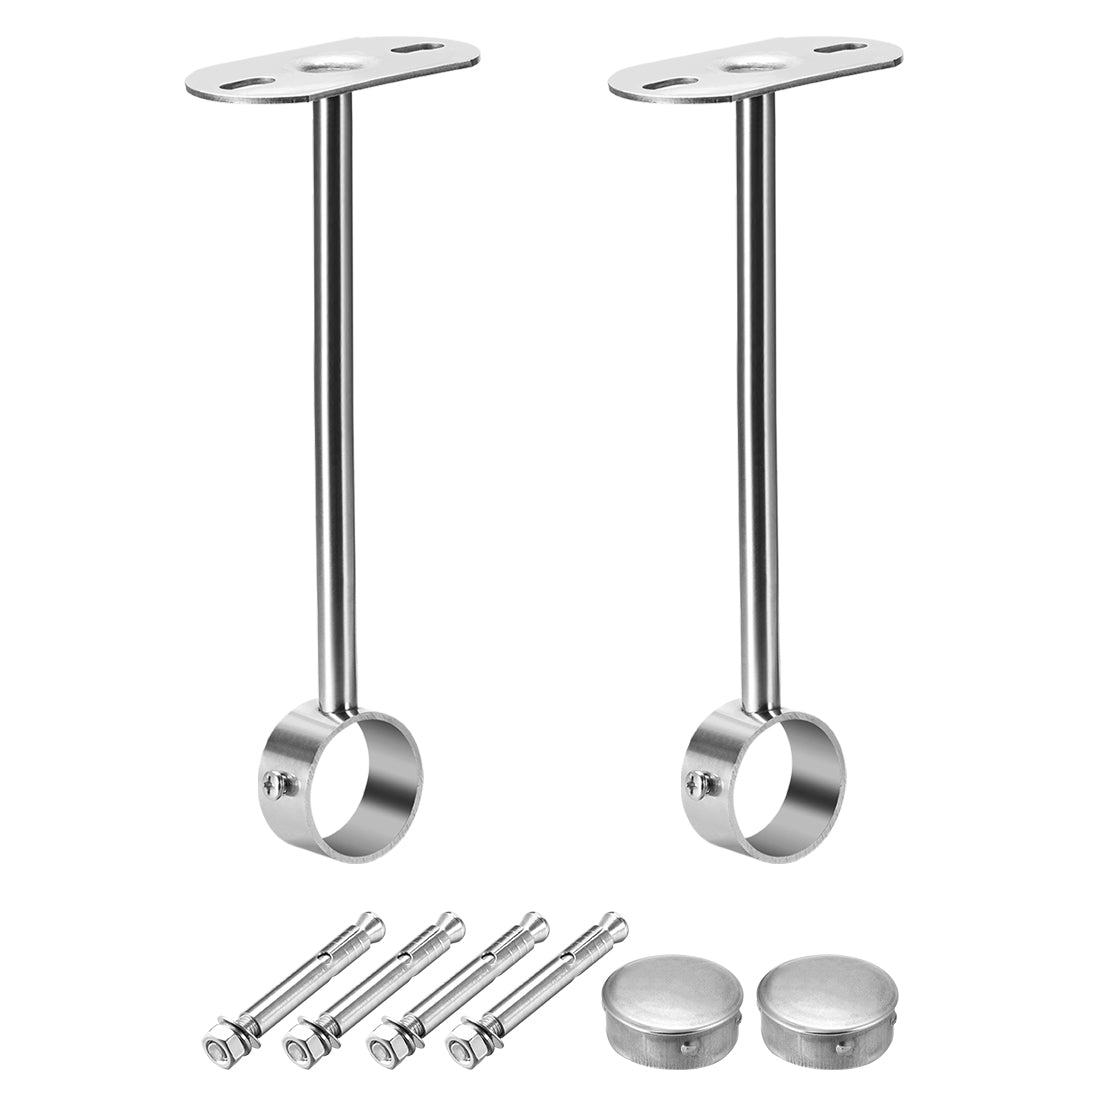 uxcell Uxcell Ceiling-Mount Bracket, Wardrobe Pipe Bracket, 32mm Dia, Shower Curtain Closet Wardrobe Rod Lever Support Holder Pipe Flange Socket 2pcs(300mm Height )